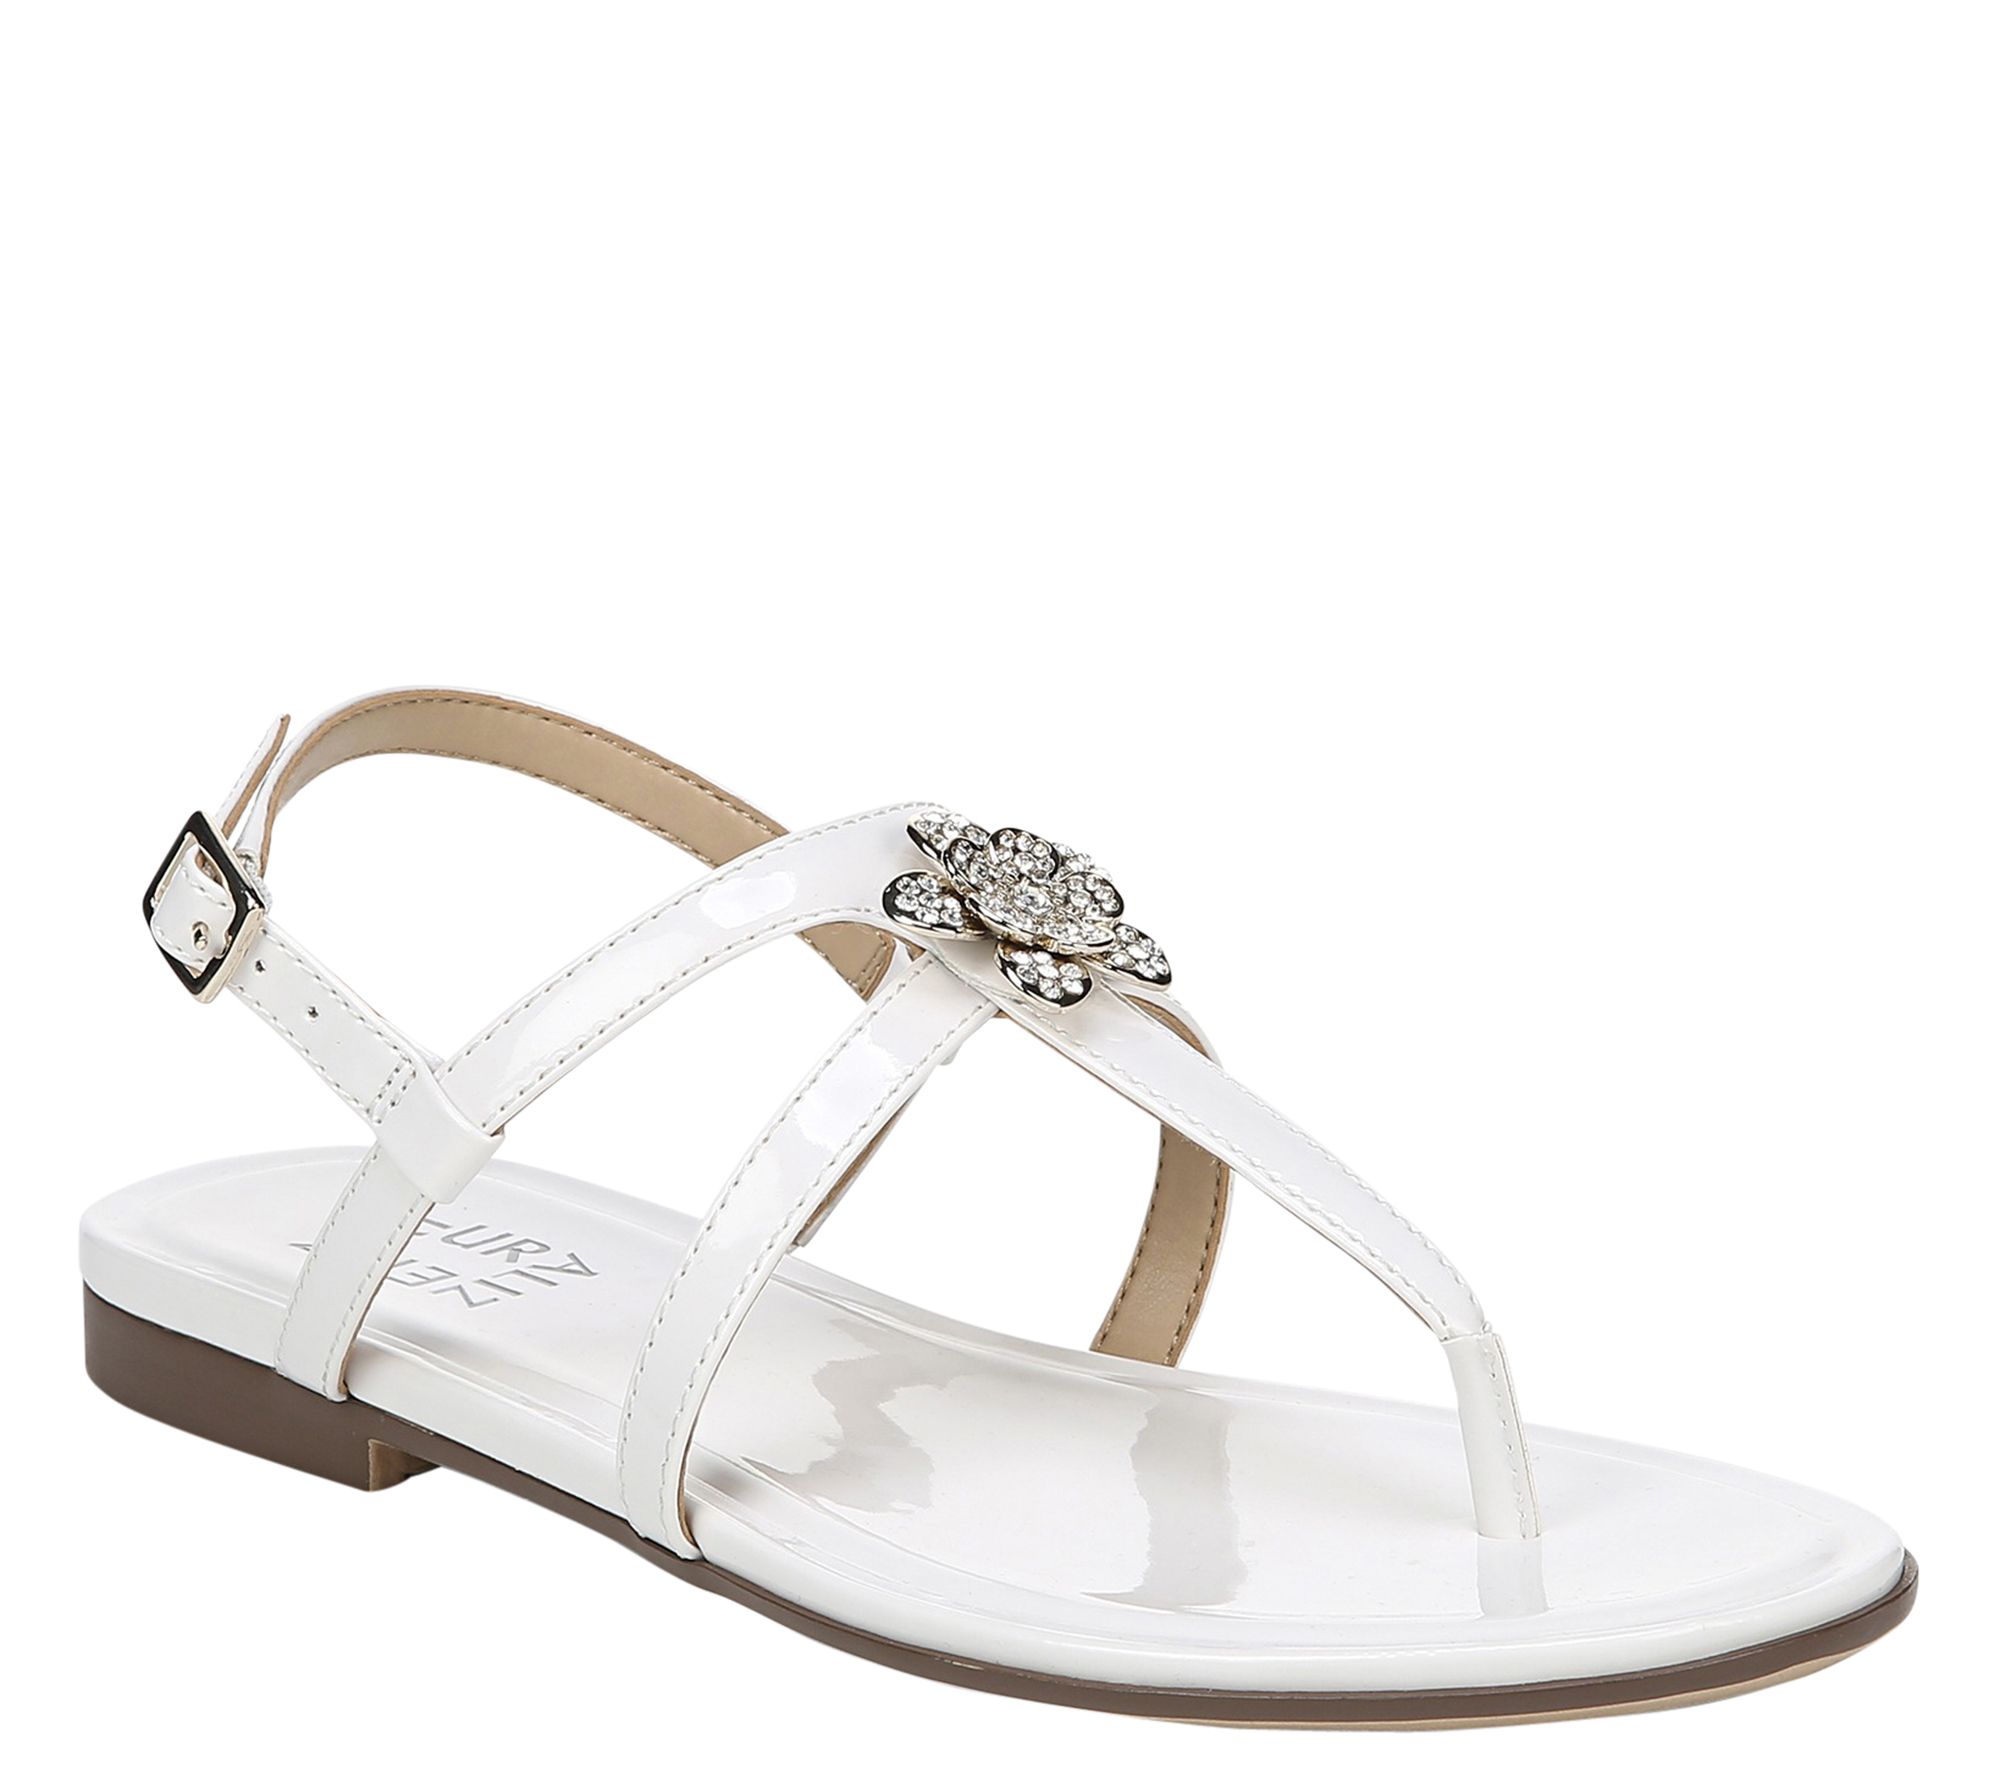 Naturalizer Strappy Sandals with Flower Detail- Tilly - QVC.com